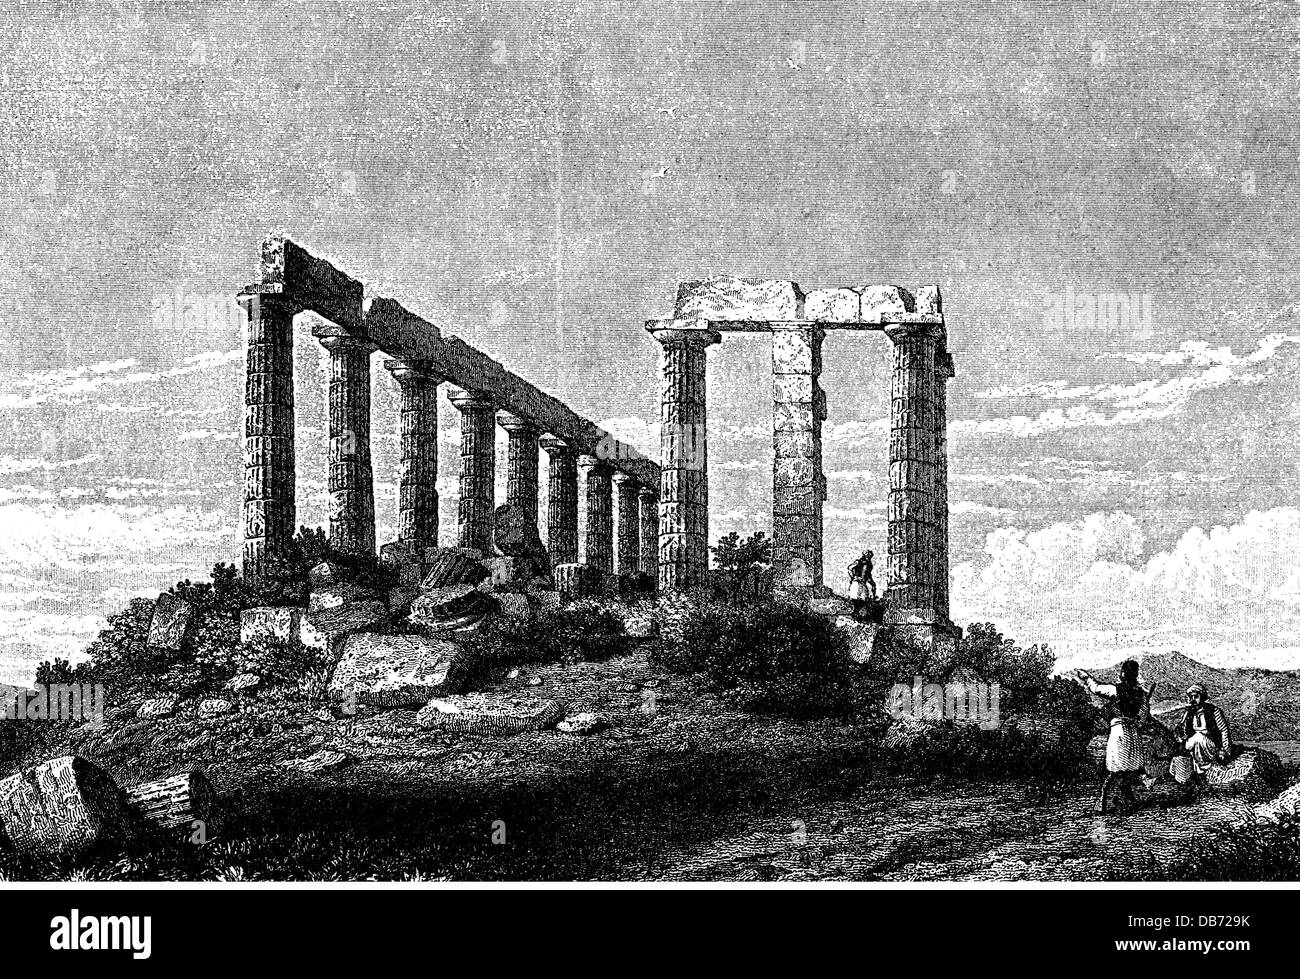 geography / travel, Greece, temple, temple of Poseidon, cape Sounion, view, wood engraving, 2nd half 19th century, ruin, ruins, Attica, landscape, landscapes, people, Europe, Southeast Europe, the Balkans, Balkan Peninsula, historic, historical, ancient world, Additional-Rights-Clearences-Not Available Stock Photo